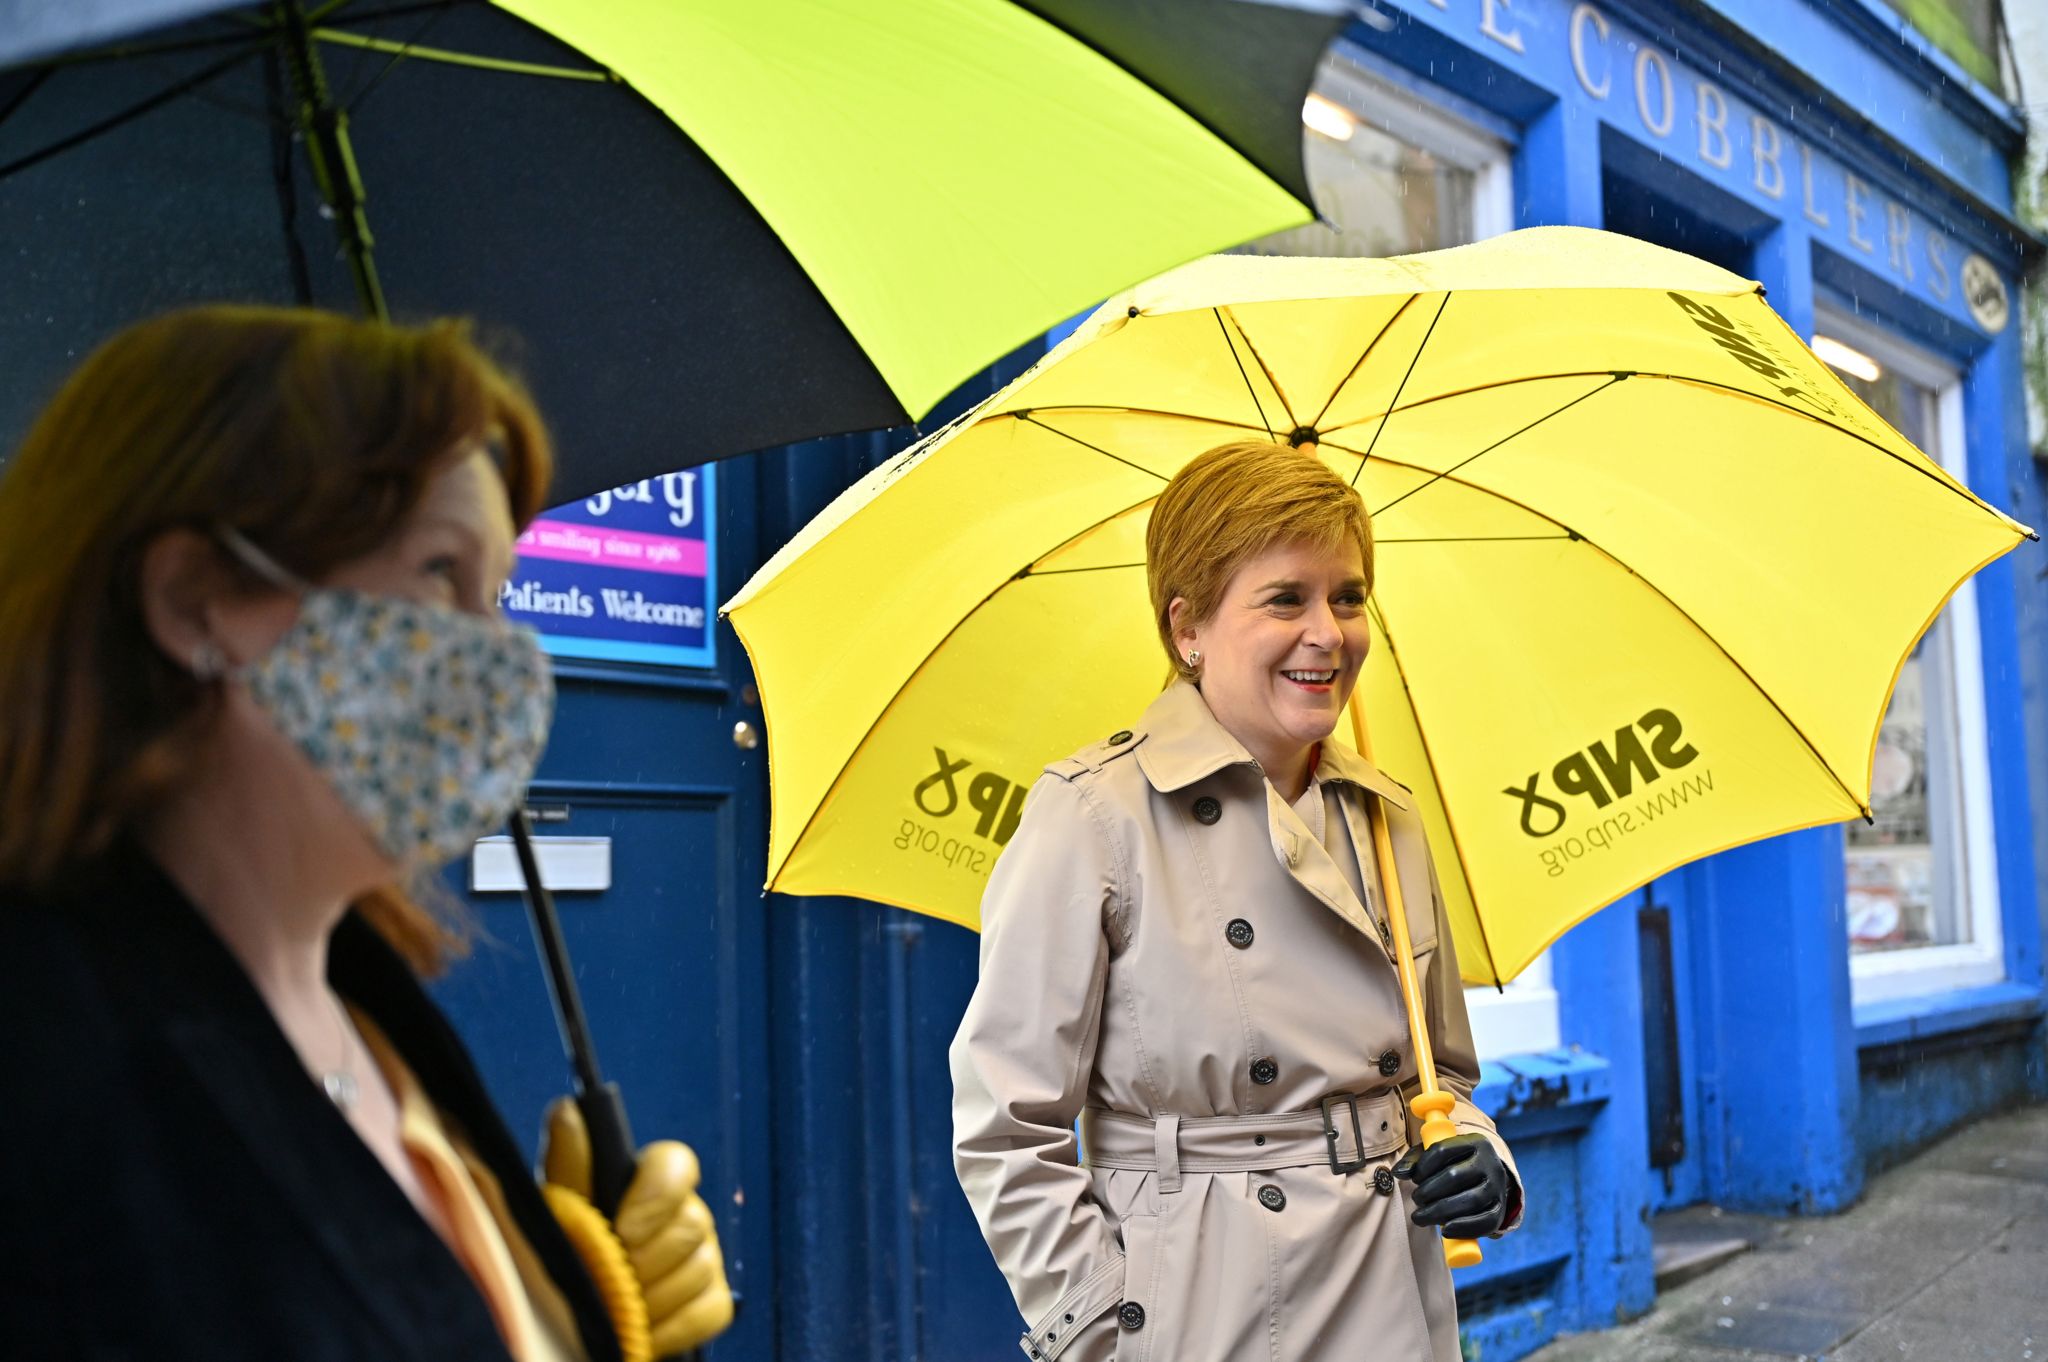 SNP leader Nicola Sturgeon holds a yellow SNP umbrella while outside shops in Dumfries